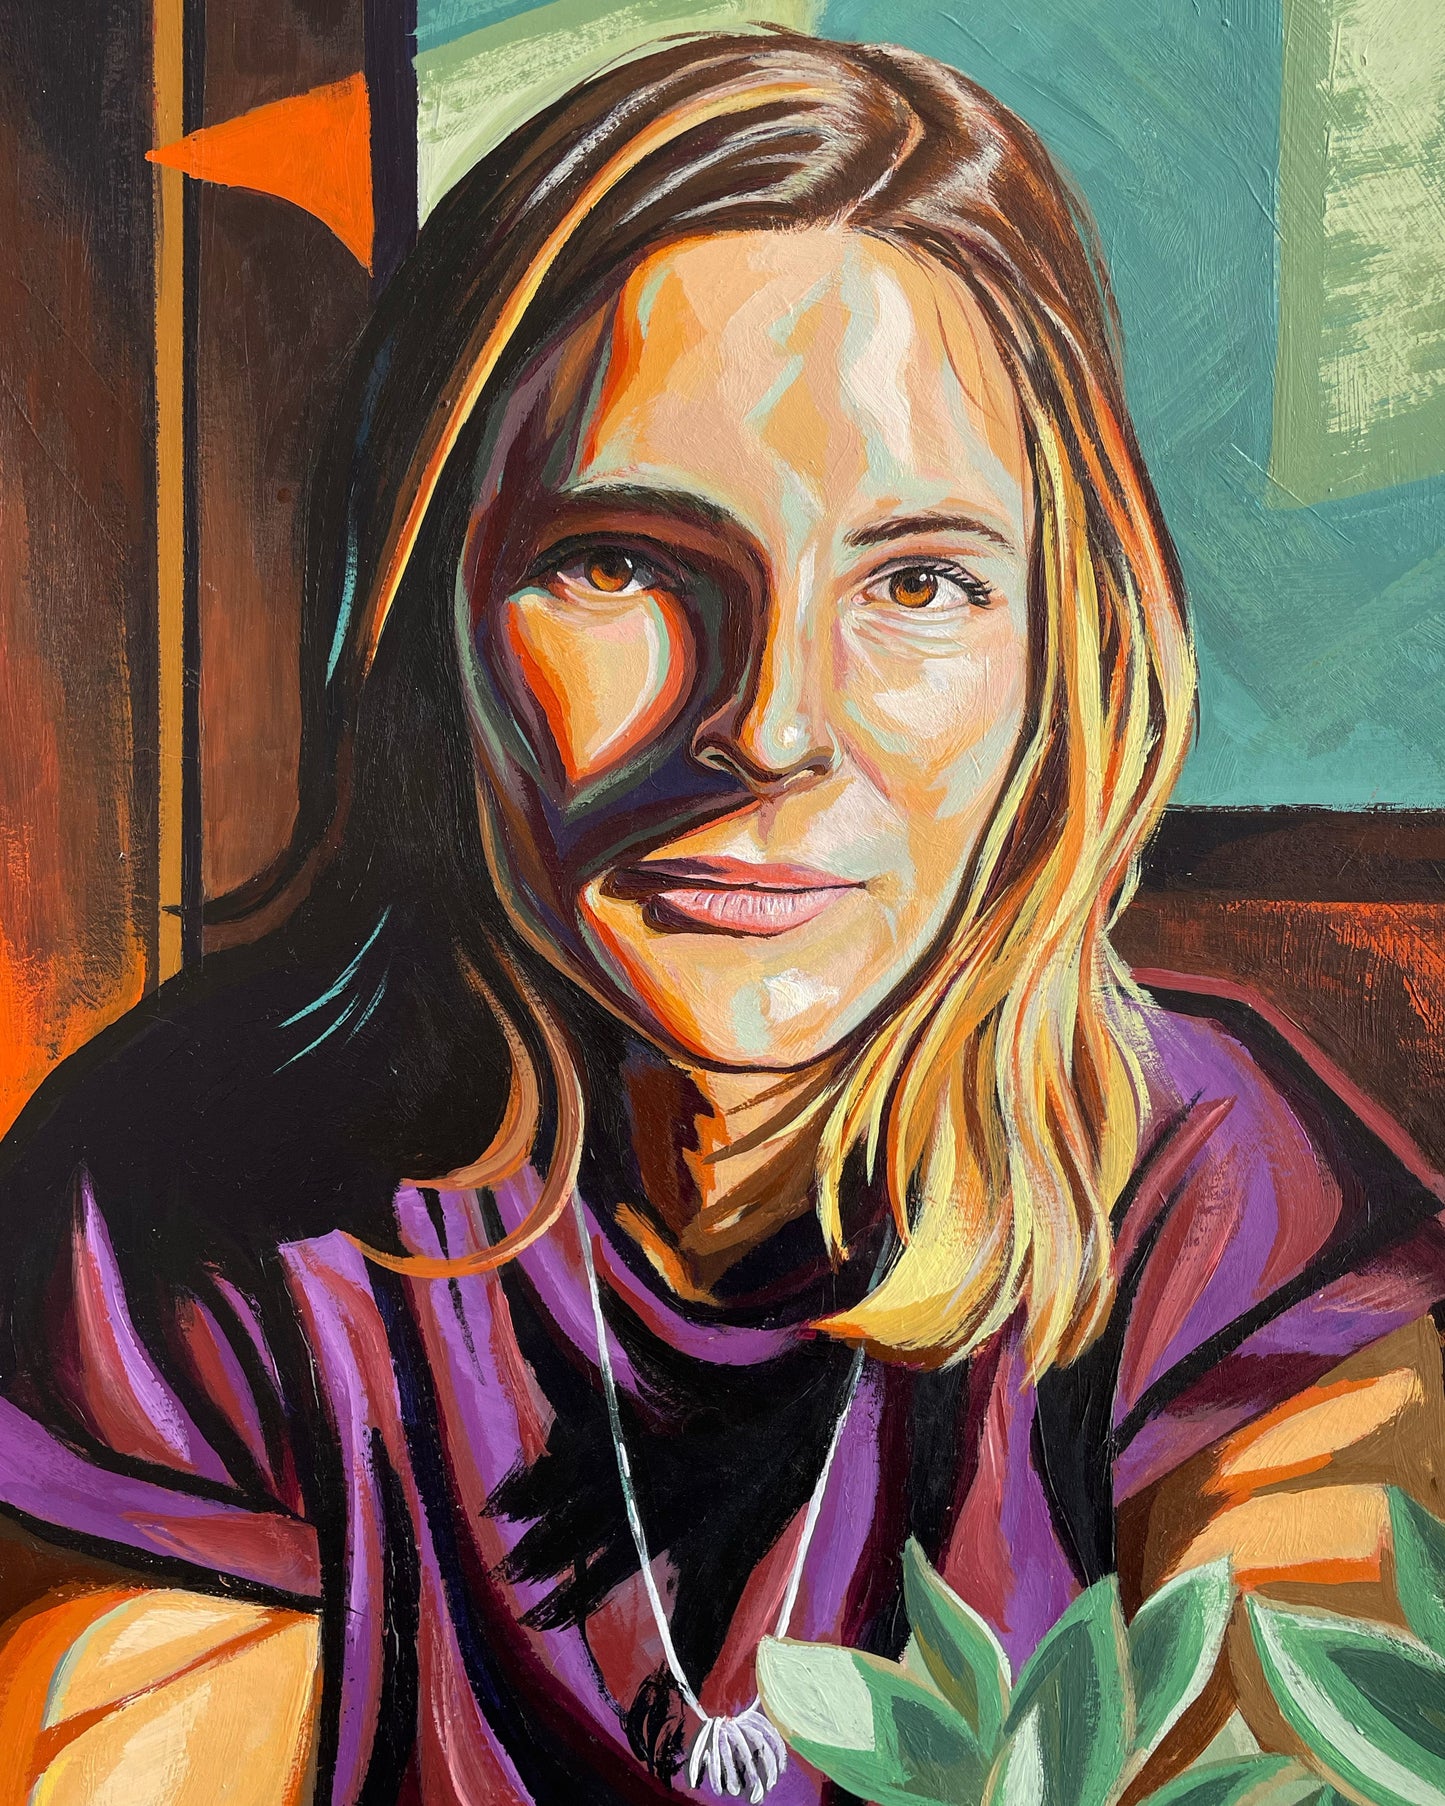 Katie's Portraits Commission: Final Payment (Small 8"x10")